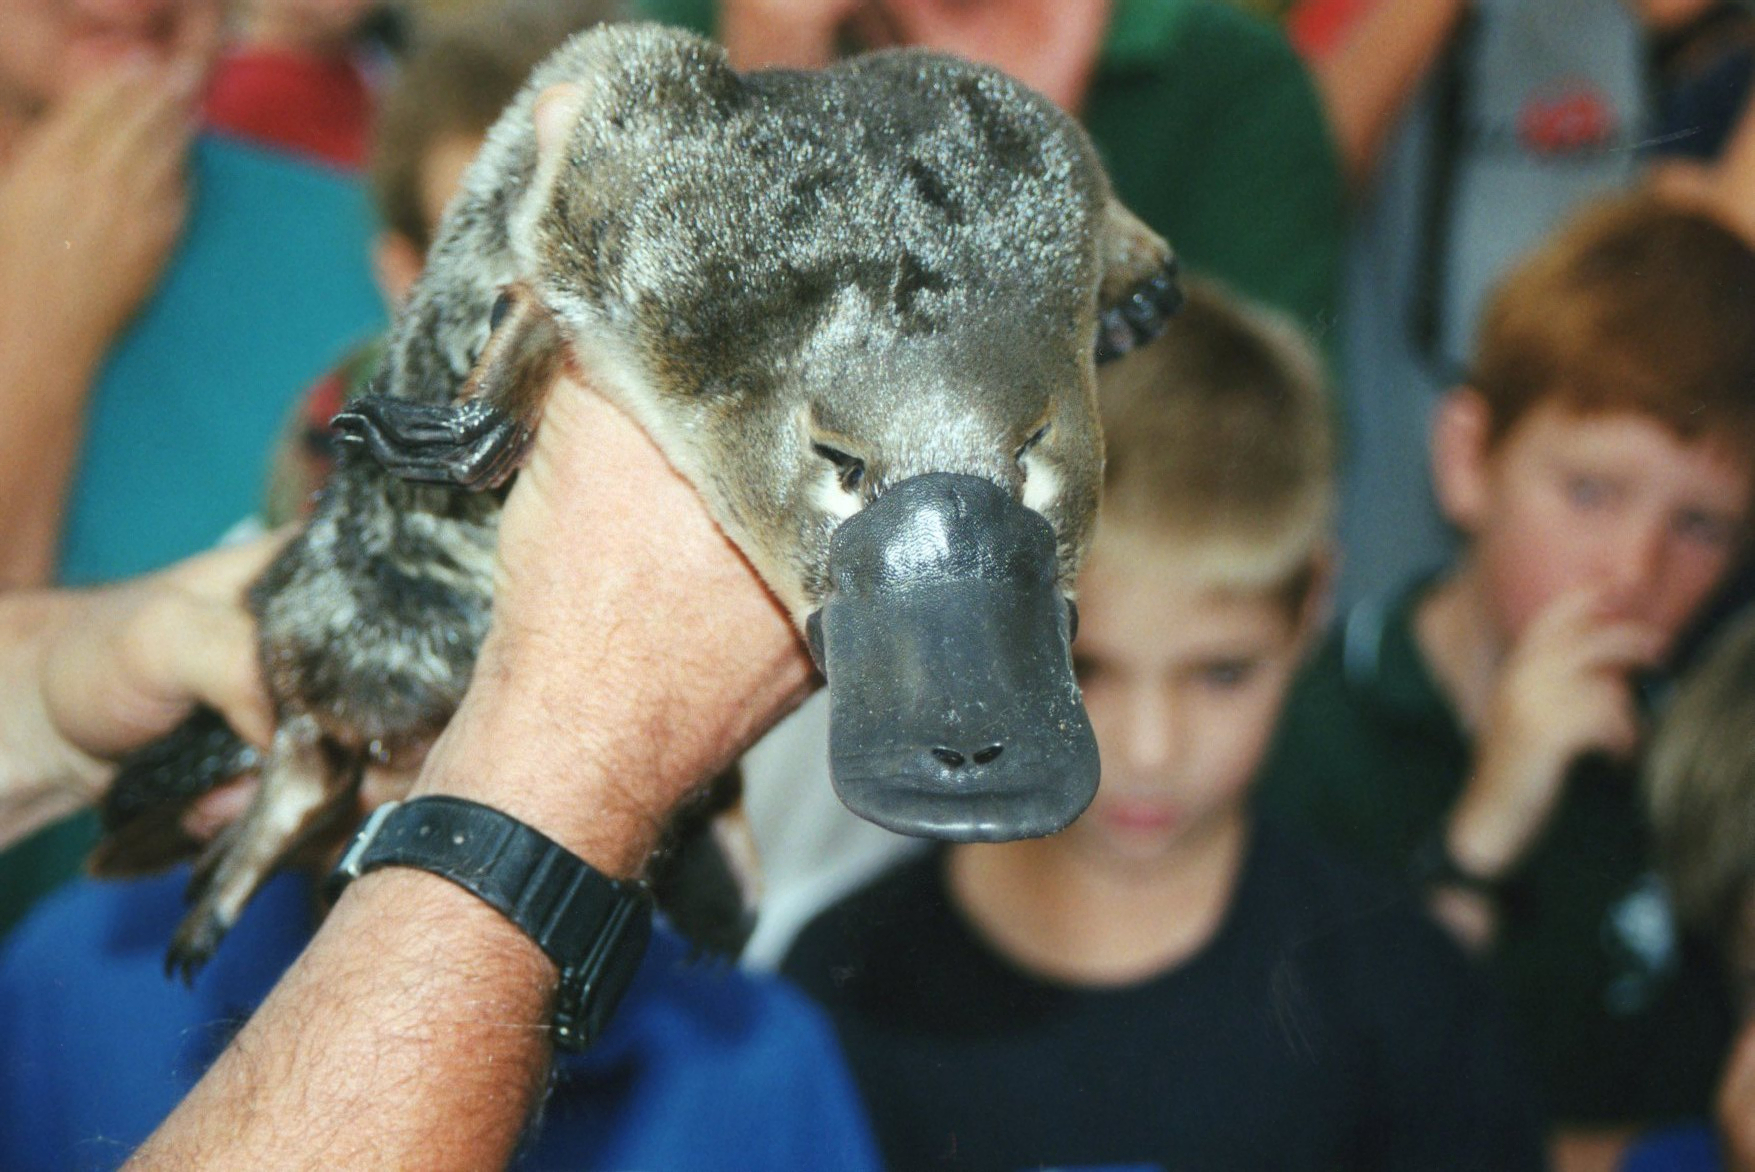 A photograph of an animal handler with a live Platypus